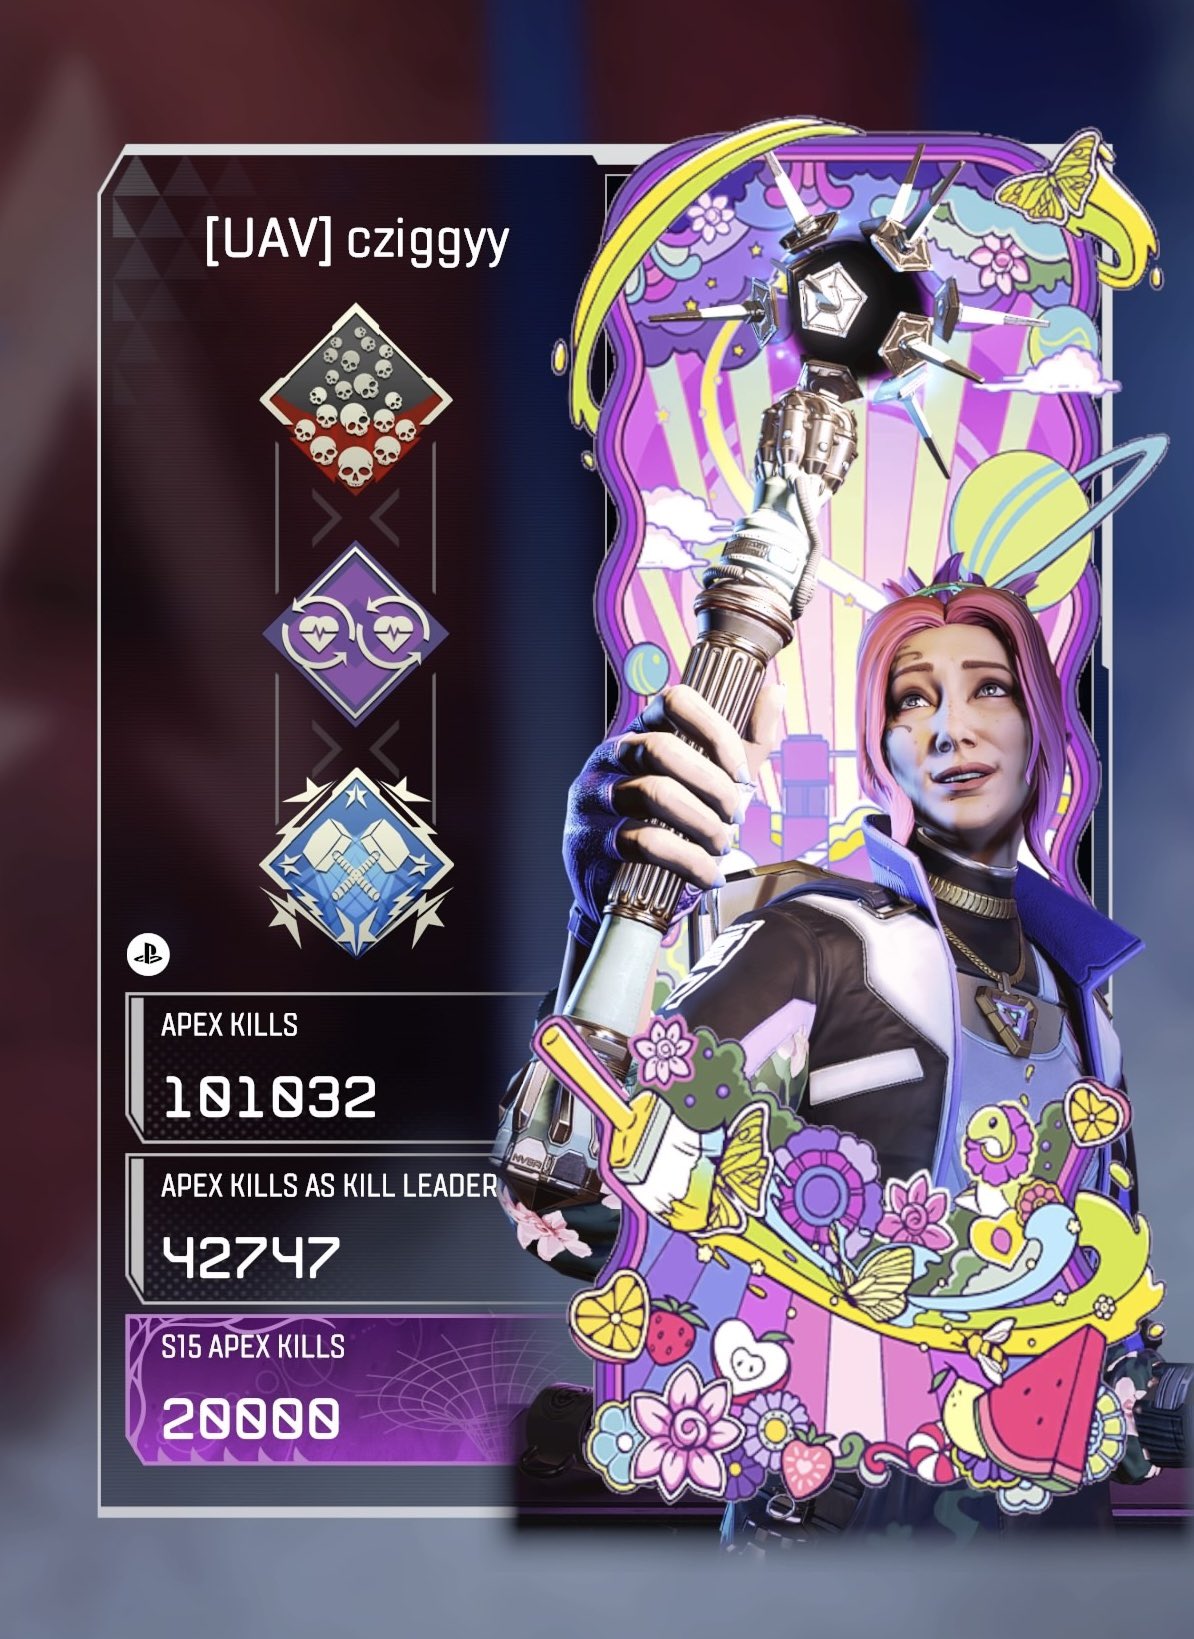 Buzxii on X: Goodbye console, welcome to pc. @PlayApex Thanks for